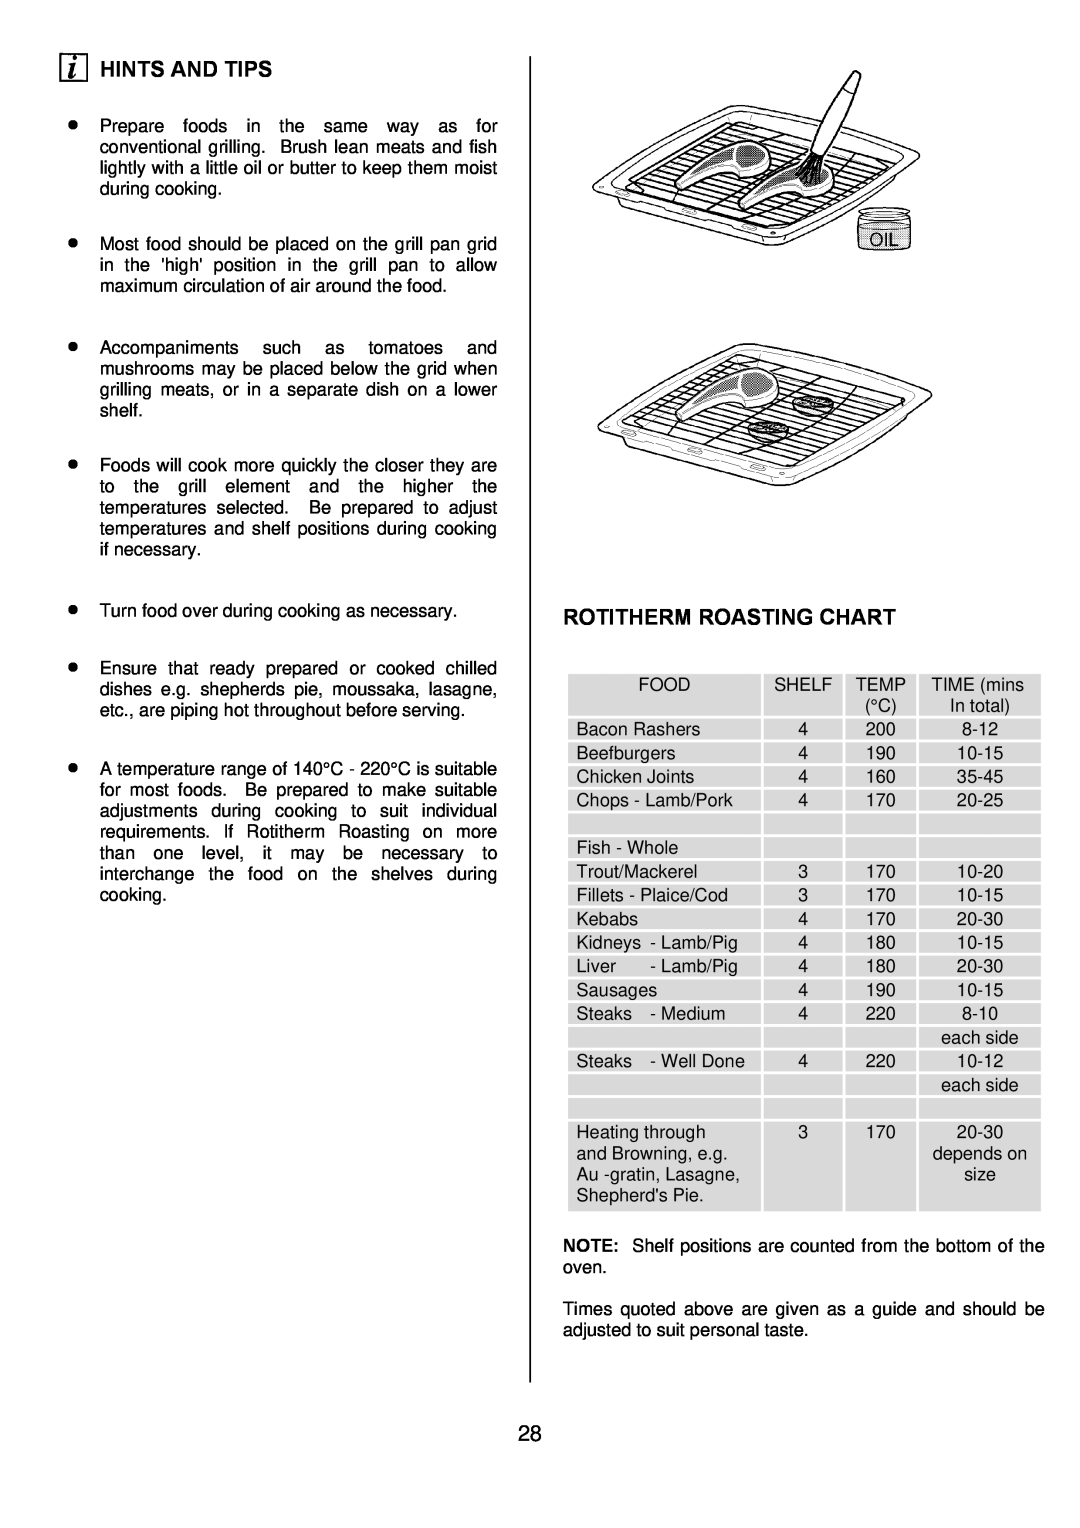 Electrolux D4101-5 manual Rotitherm Roasting Chart, Hints And Tips 